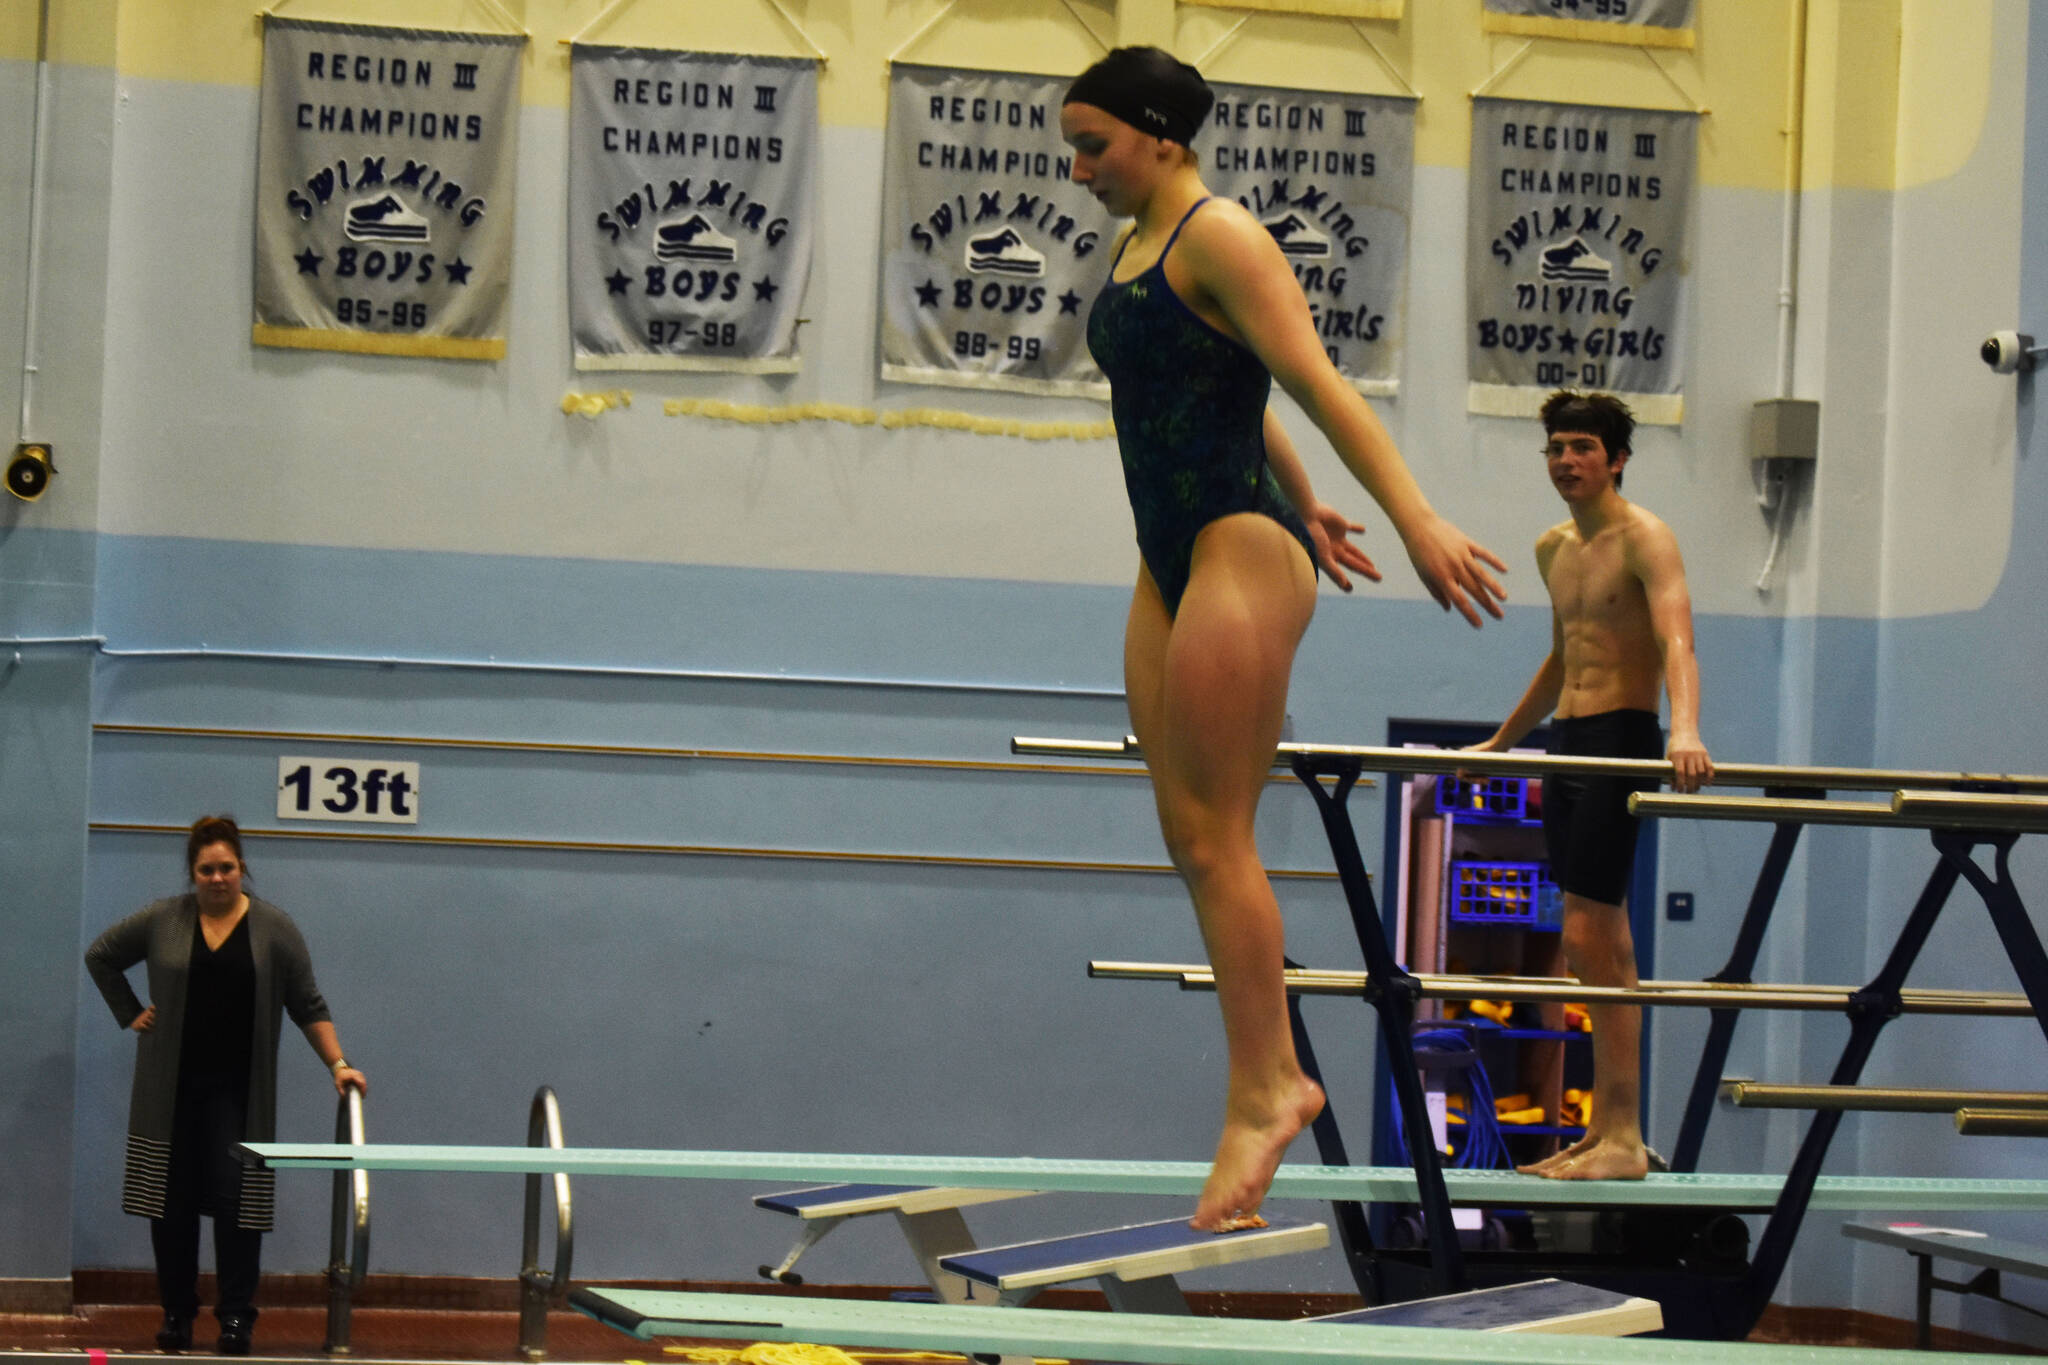 Abriella Werner leaps as she approaches the end of the diving board, Shonia Werner and Derrick Jones watch during a dive practice on Tuesday, Oct. 11, 2022, at Soldotna High School in Soldotna, Alaska. (Jake Dye/Peninsula Clarion)